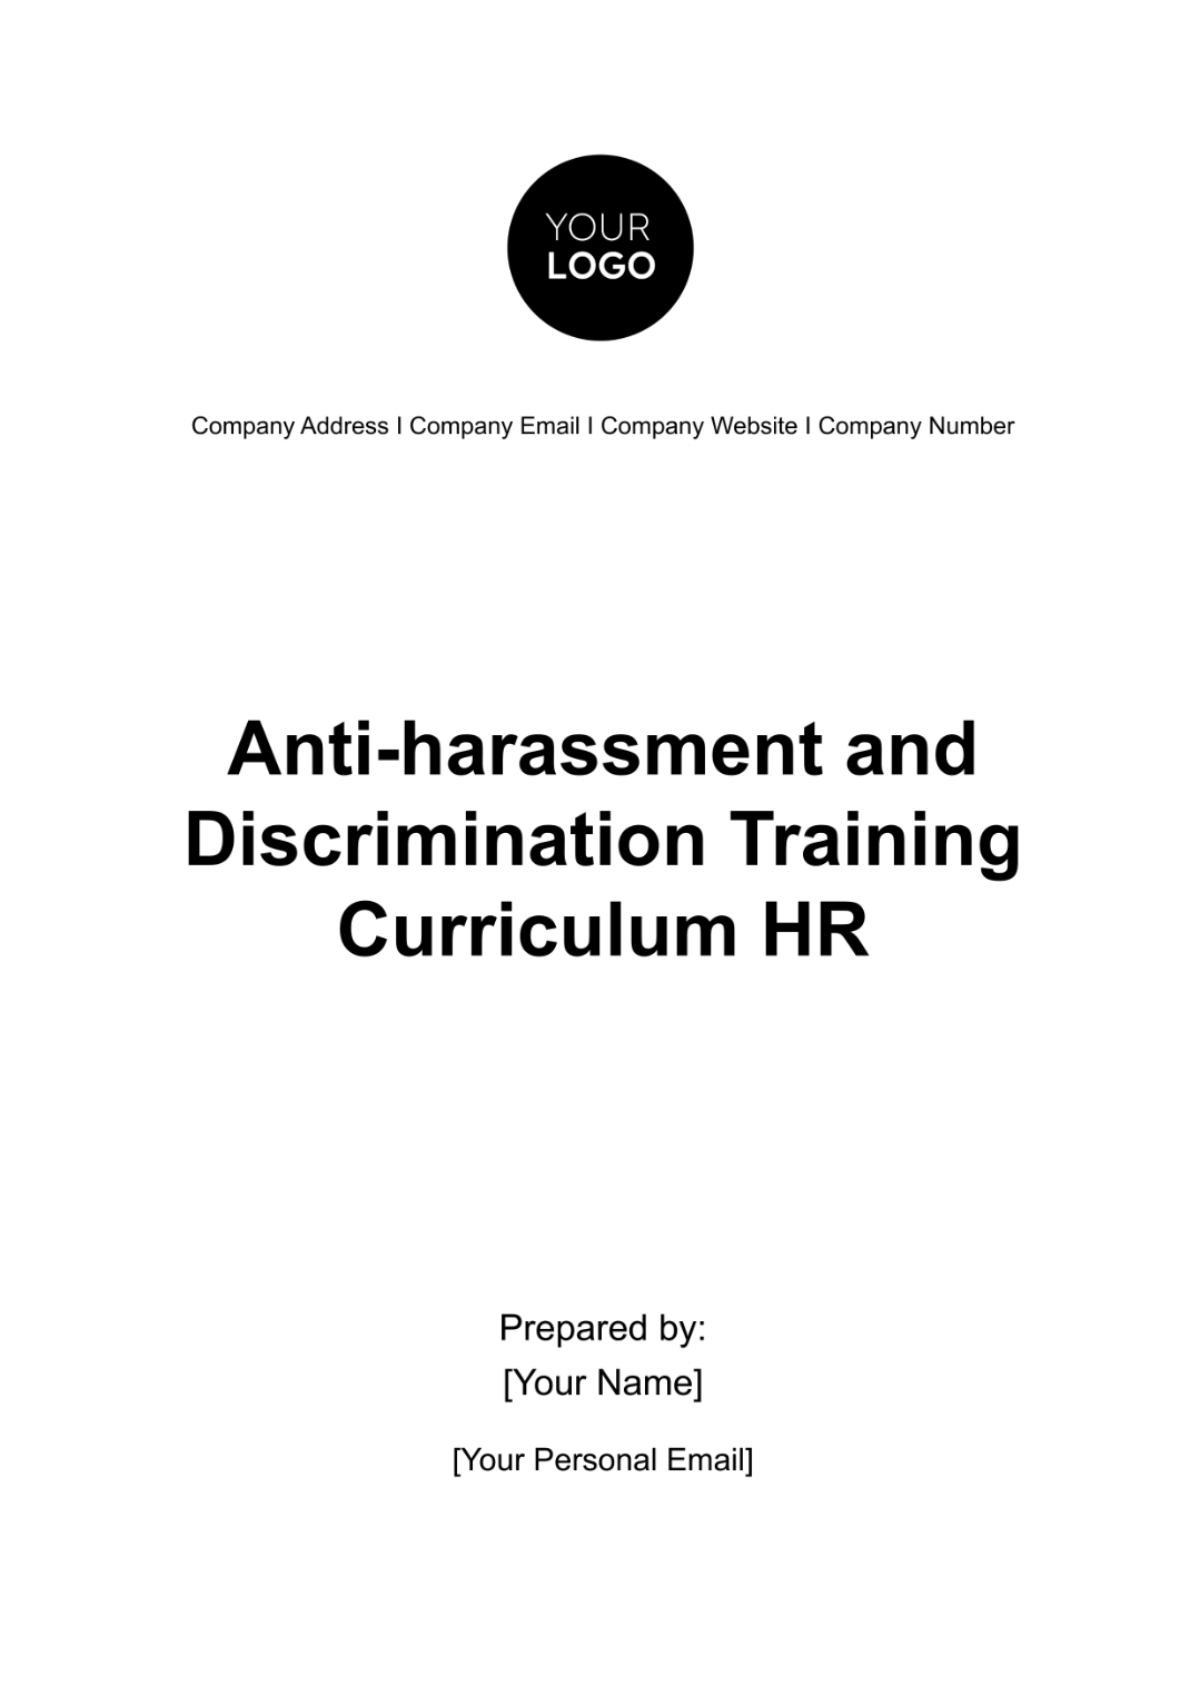 Free Anti-harassment and Discrimination Training Curriculum HR Template